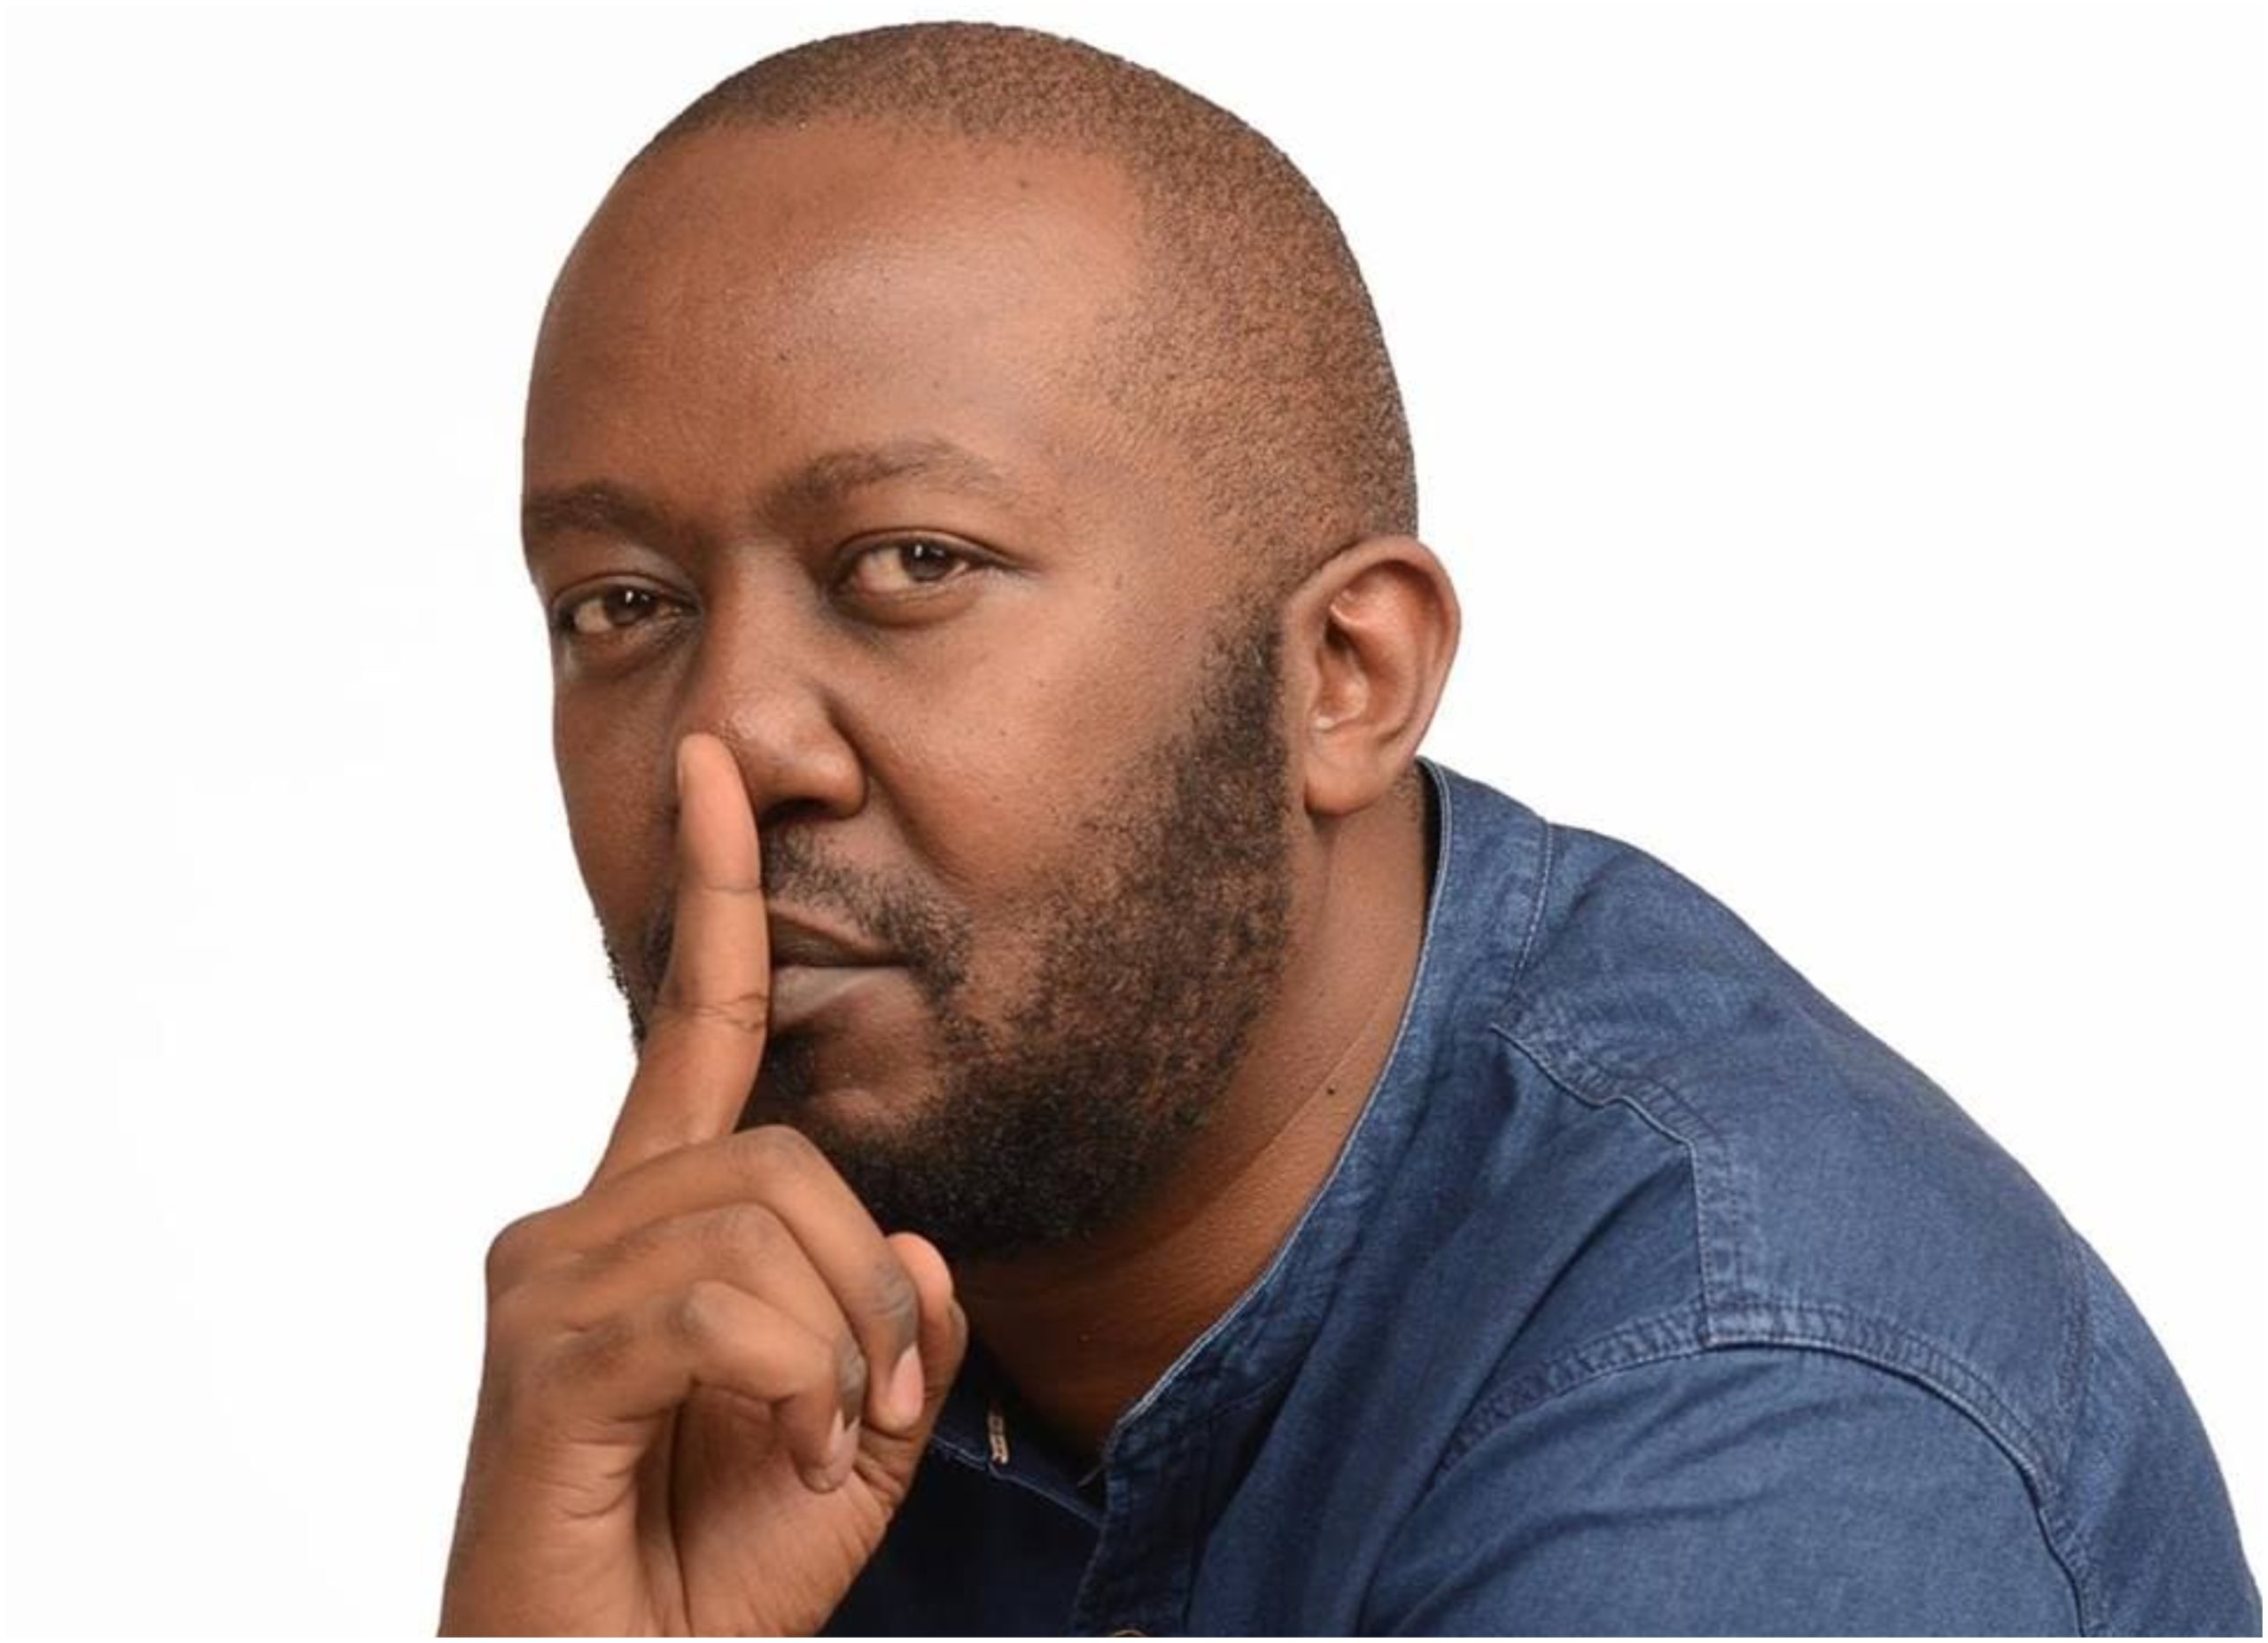 Heartbroken Andrew Kibe opens up on painful battles with side chicks